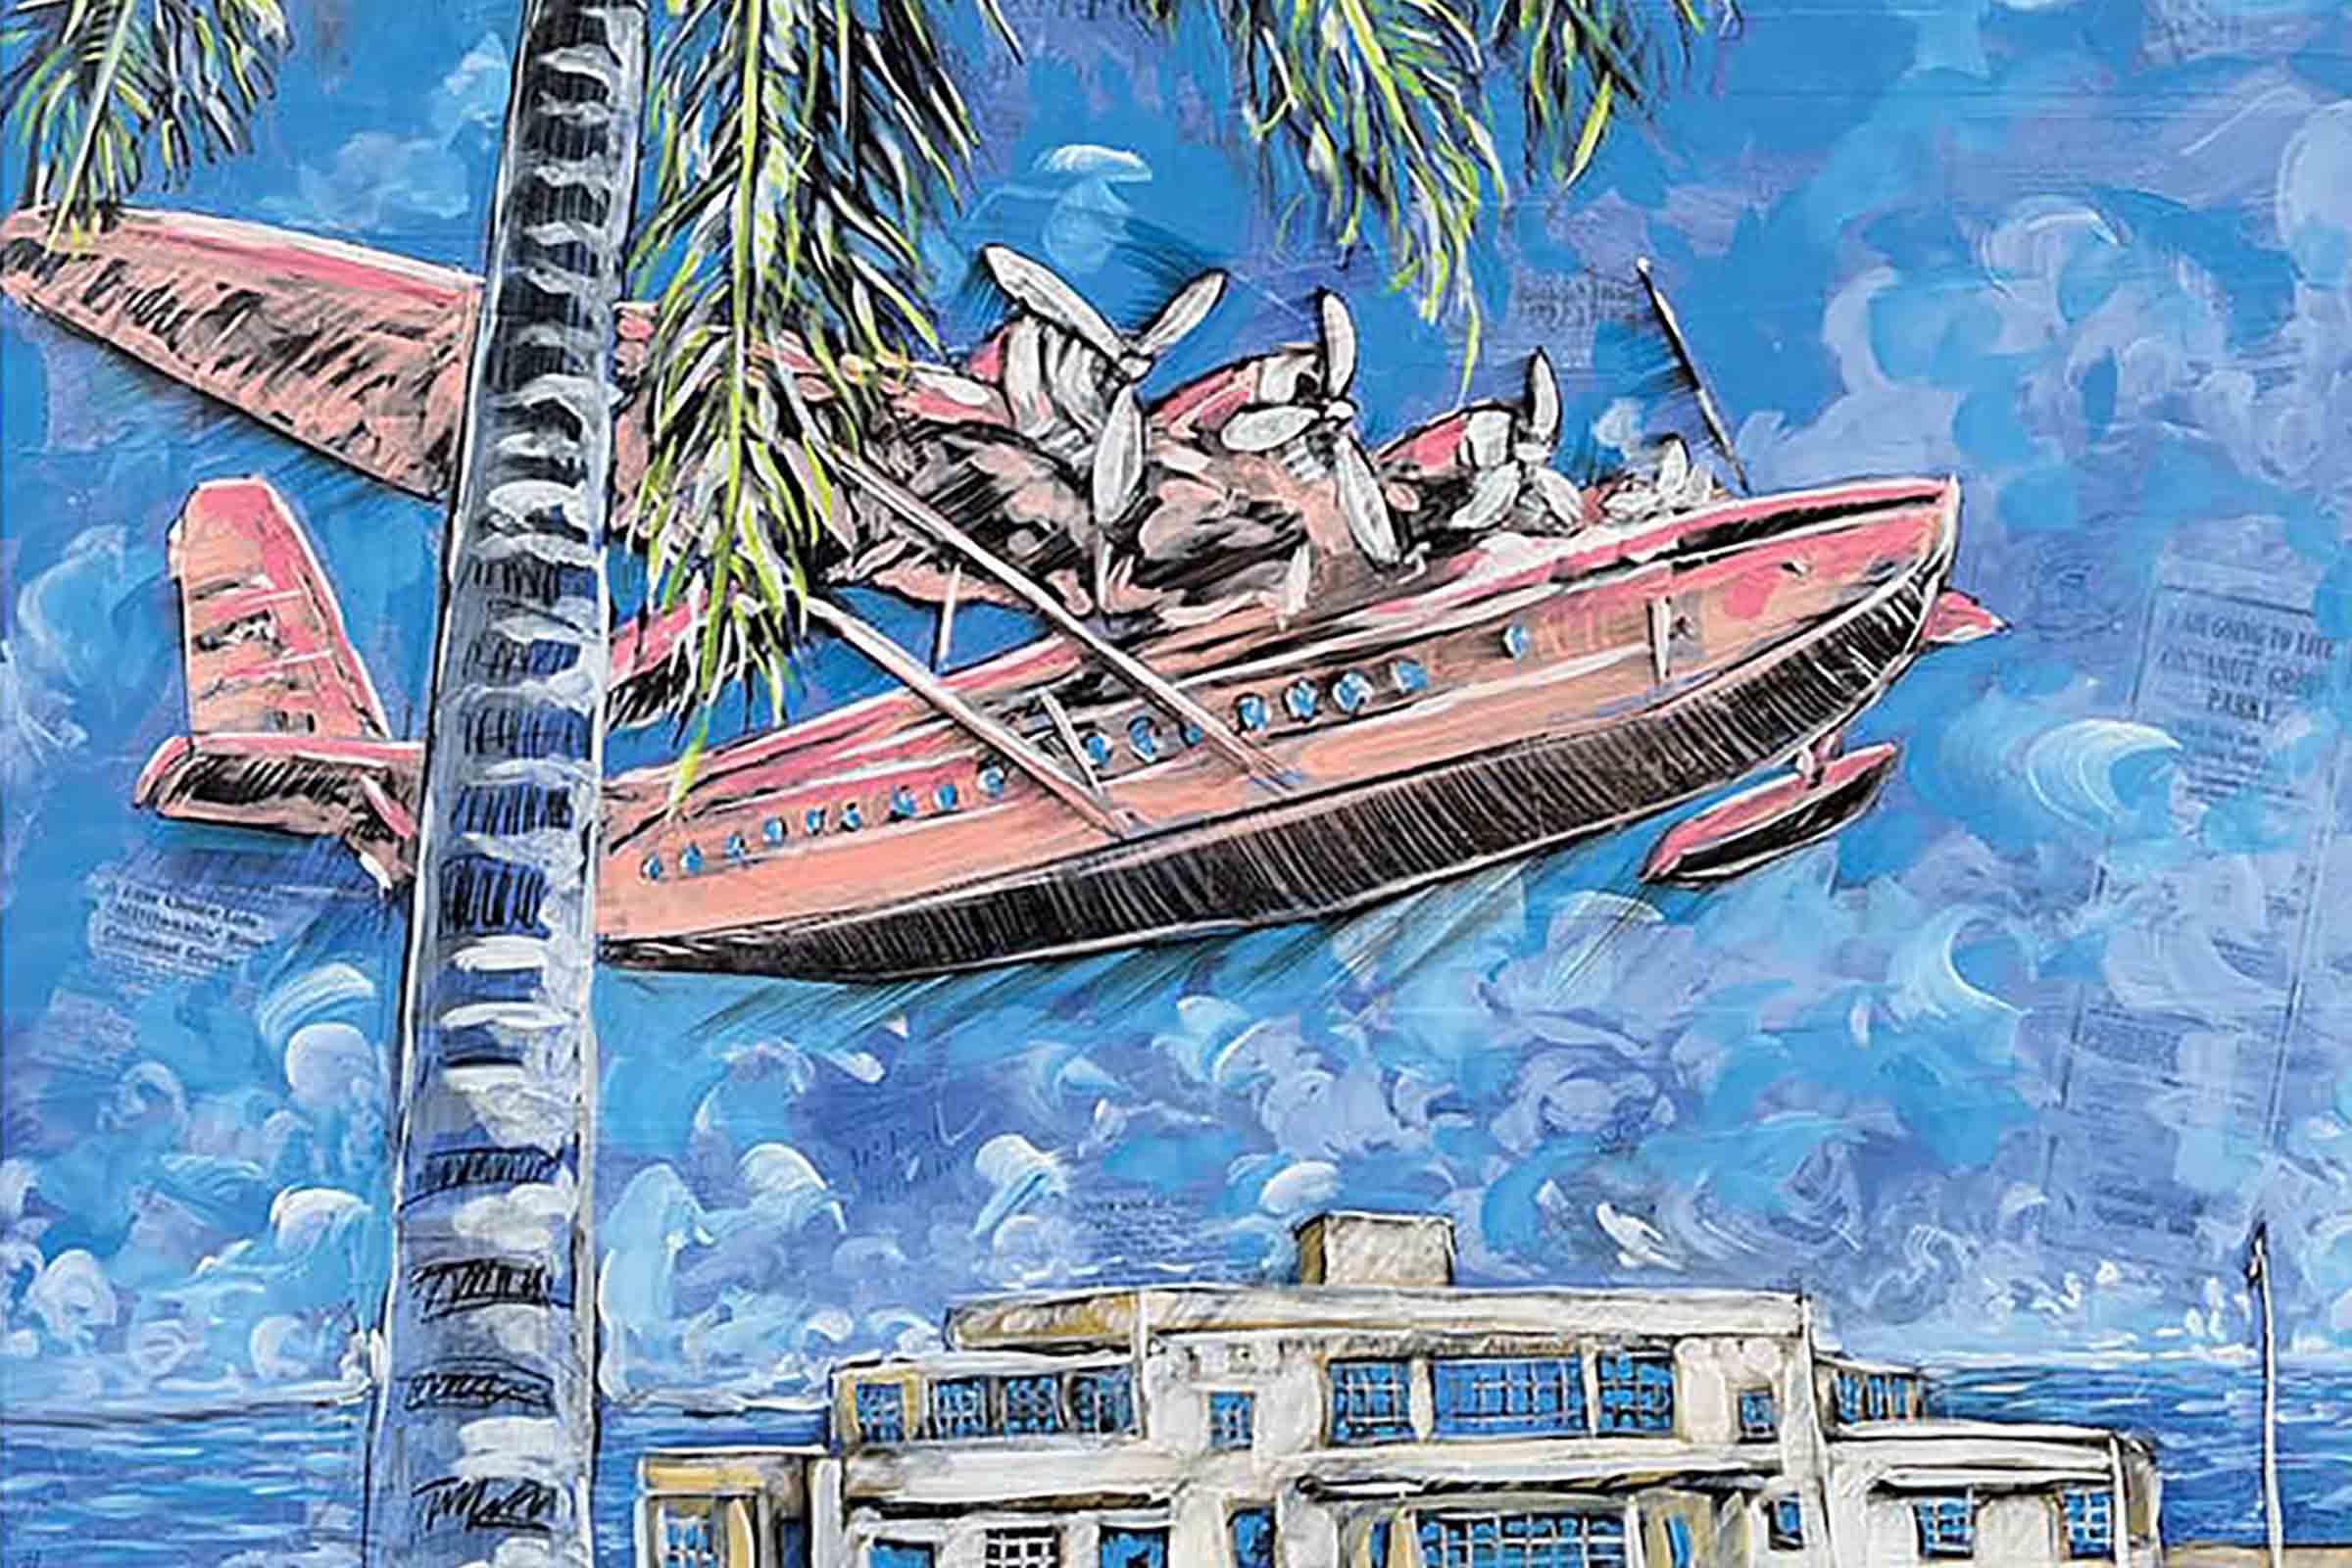 The Coconut Grove Arts Festival’s Official 2023 Poster Pays Homage To Dinner Key